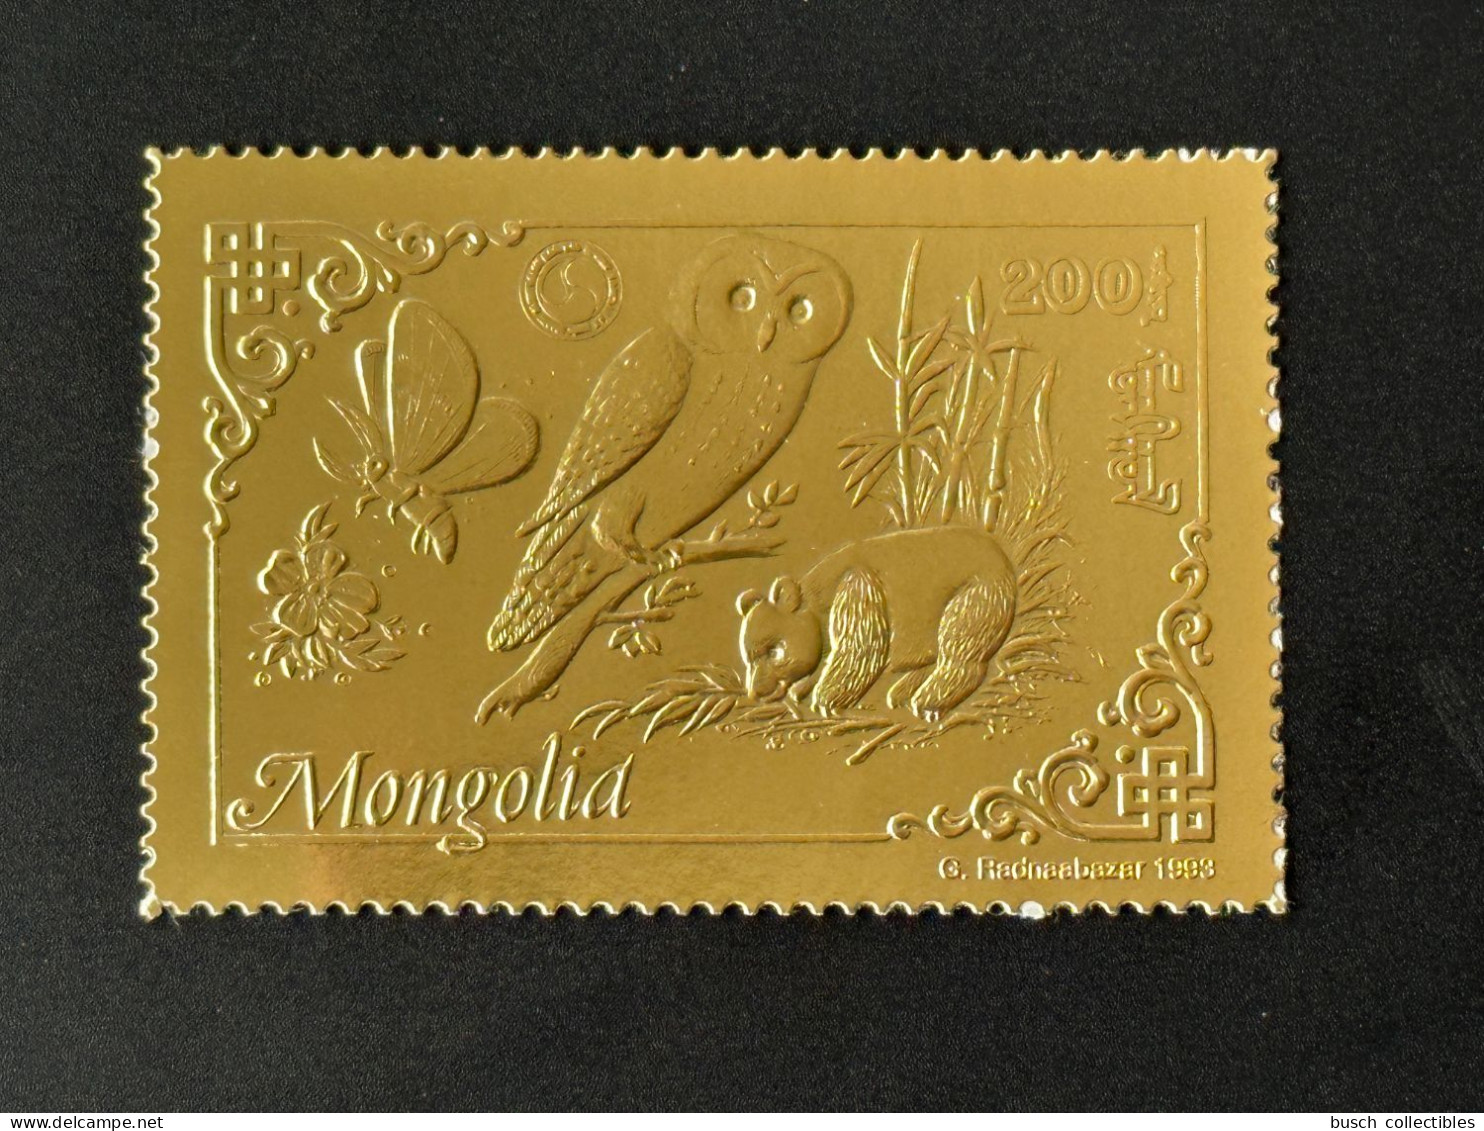 Mongolie Mongolia 1993 Mi. 2475 A Or Gold Rotary Lions Butterfly Owl Eule Panda Papillon Schmetterling Chouette - Osos